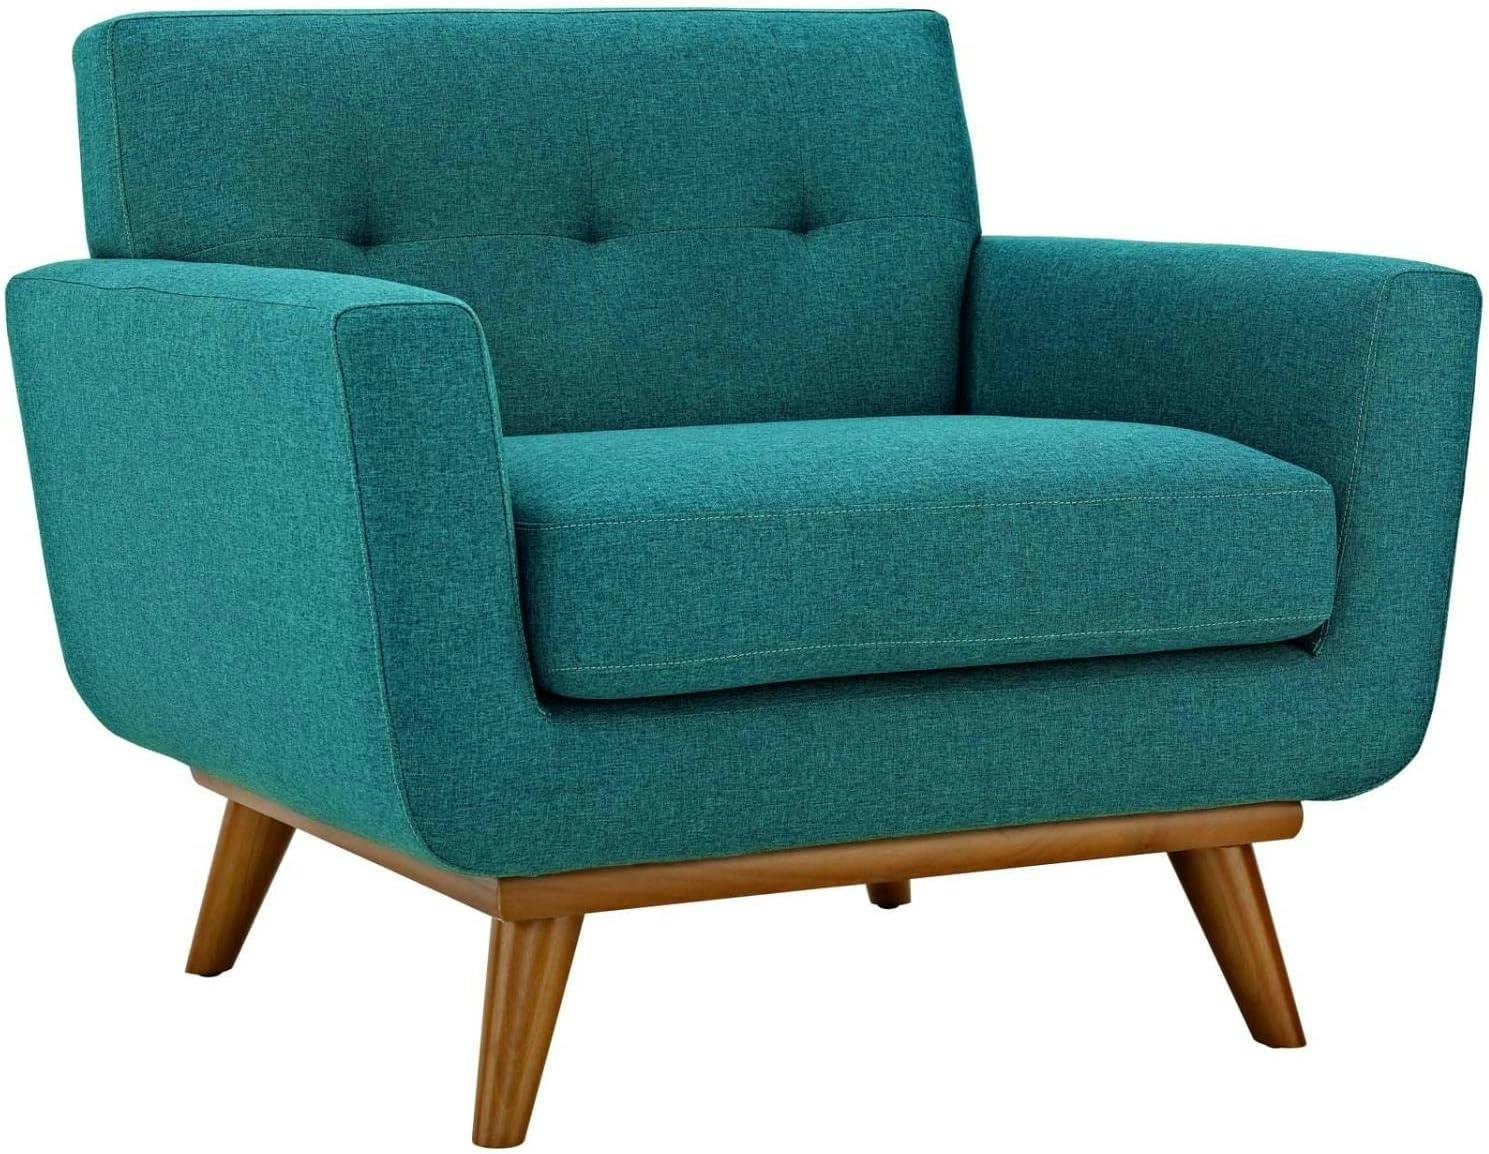 Teal Blue Plush Fabric Accent Armchair with Cherry Wood Legs